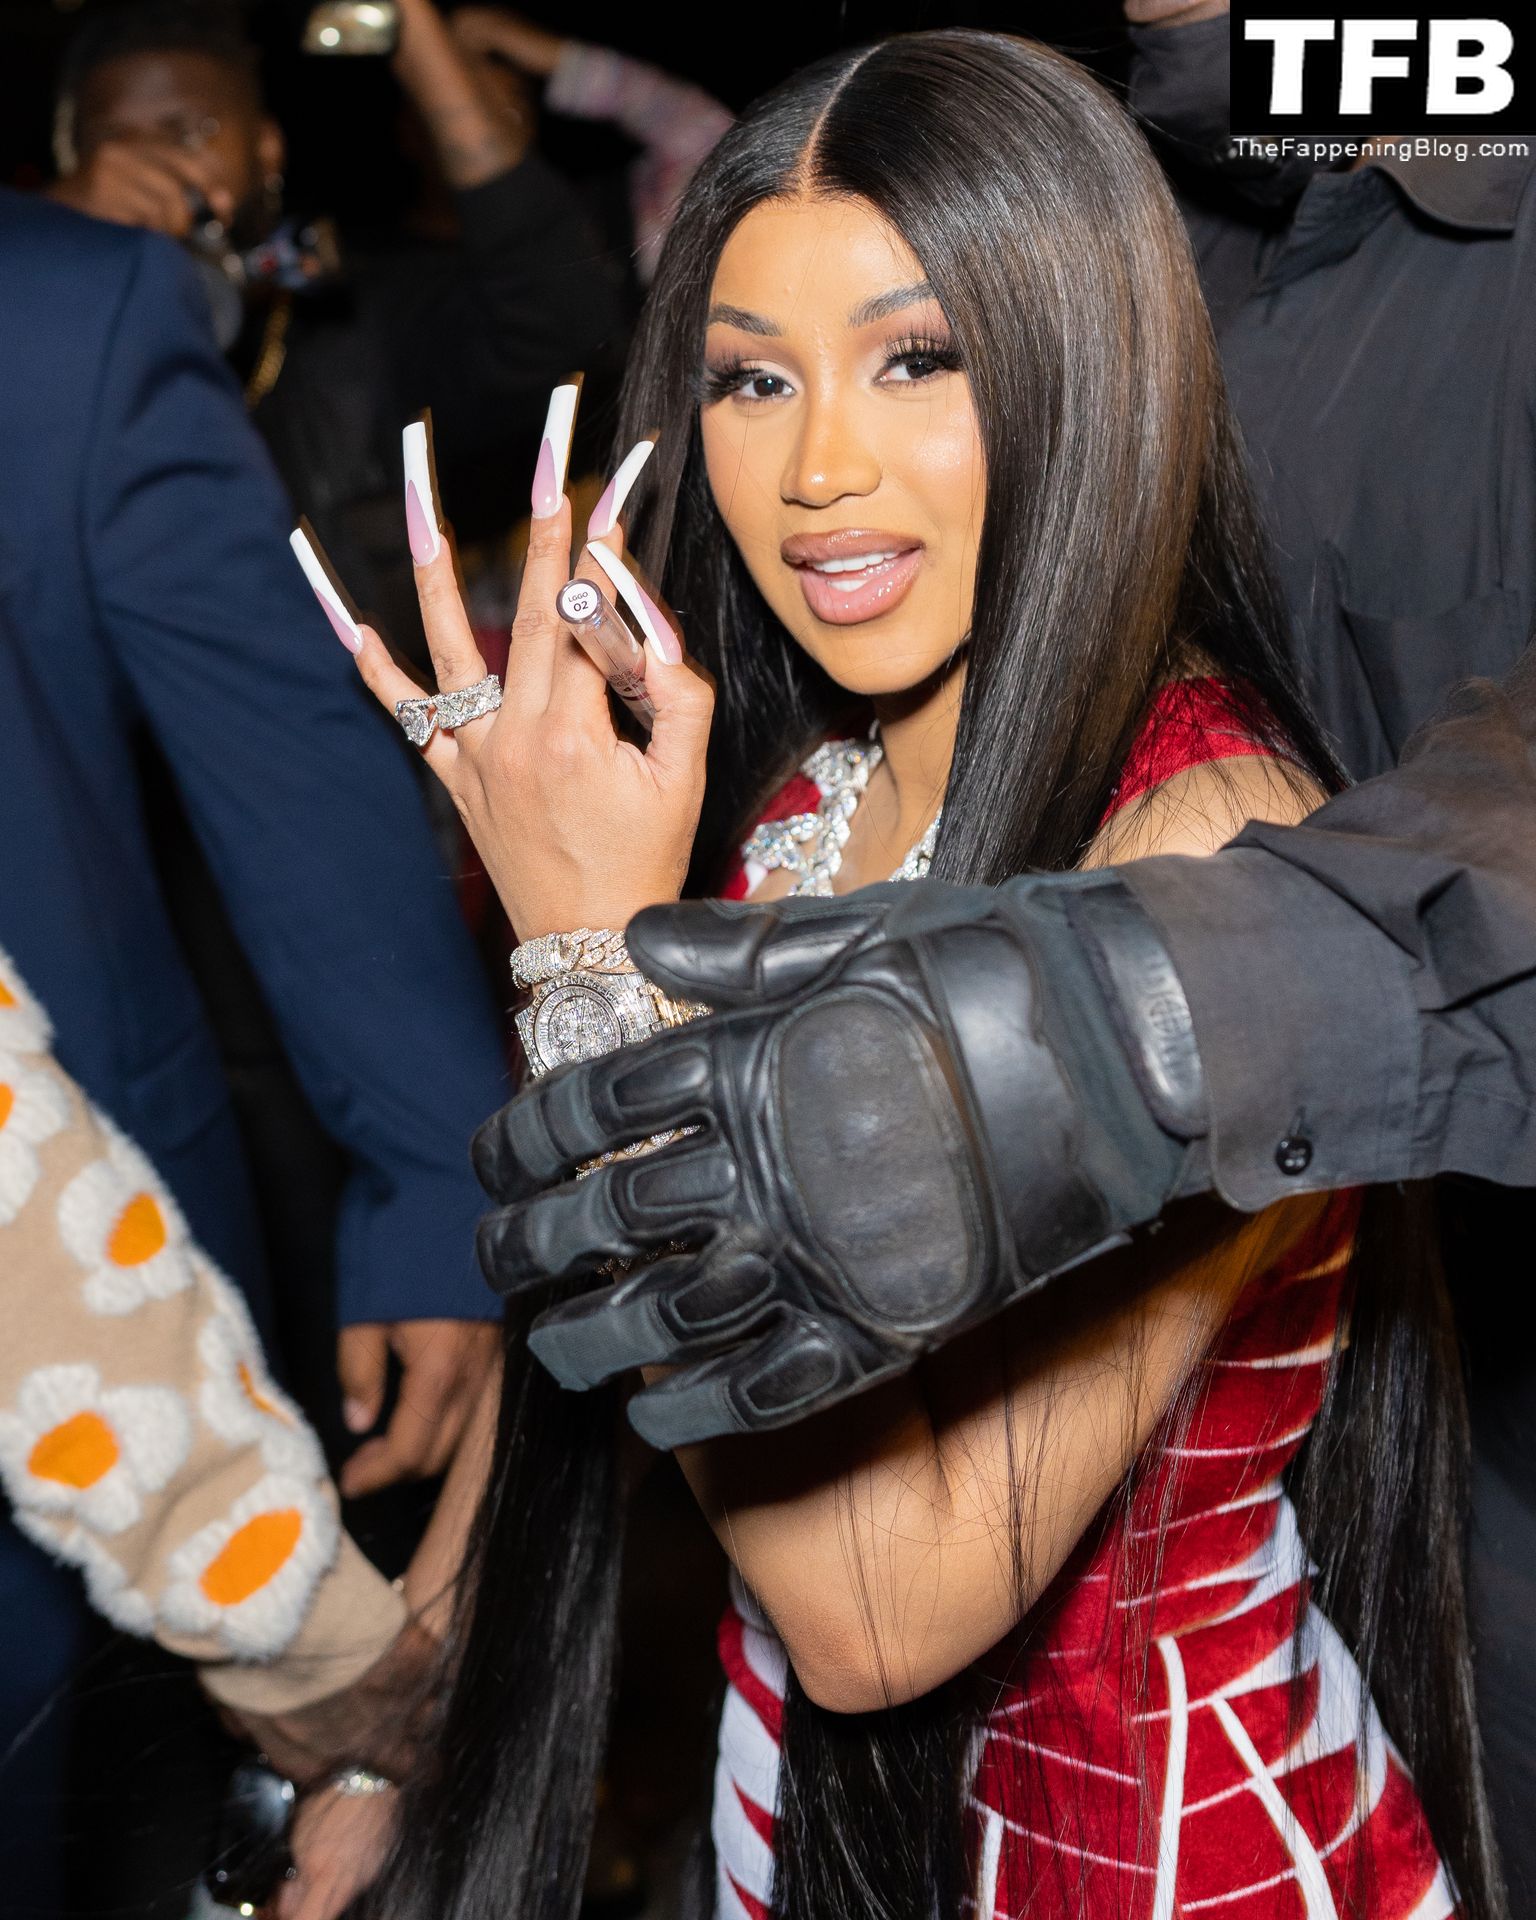 Cardi B Sexy Tits The Fappening Blog 4 - Cardi B Flaunts Her Cleavage as She Leaves a Club with Offset in NYC (8 Photos)